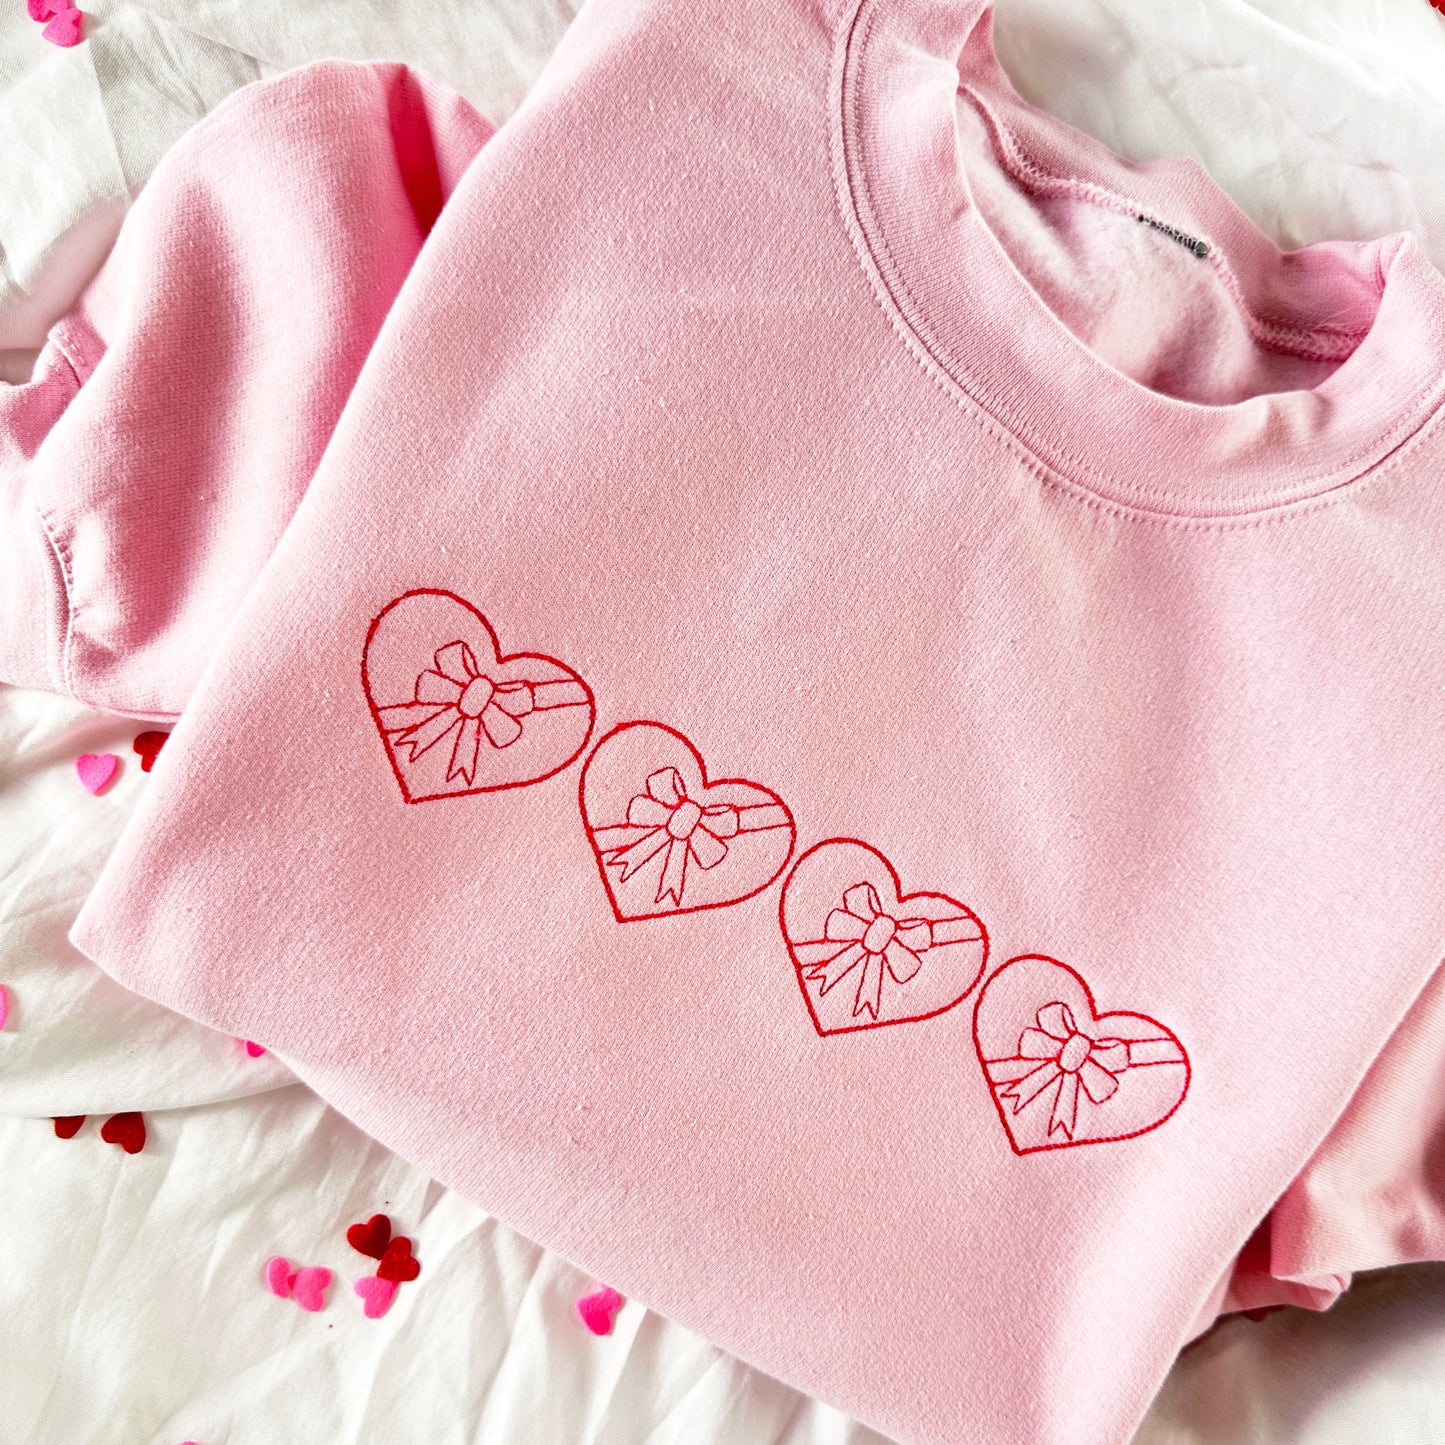 upclose of a light pink crewneck sweatshirt with 4 stitched hearts with bows in them across the chest for valentines day 